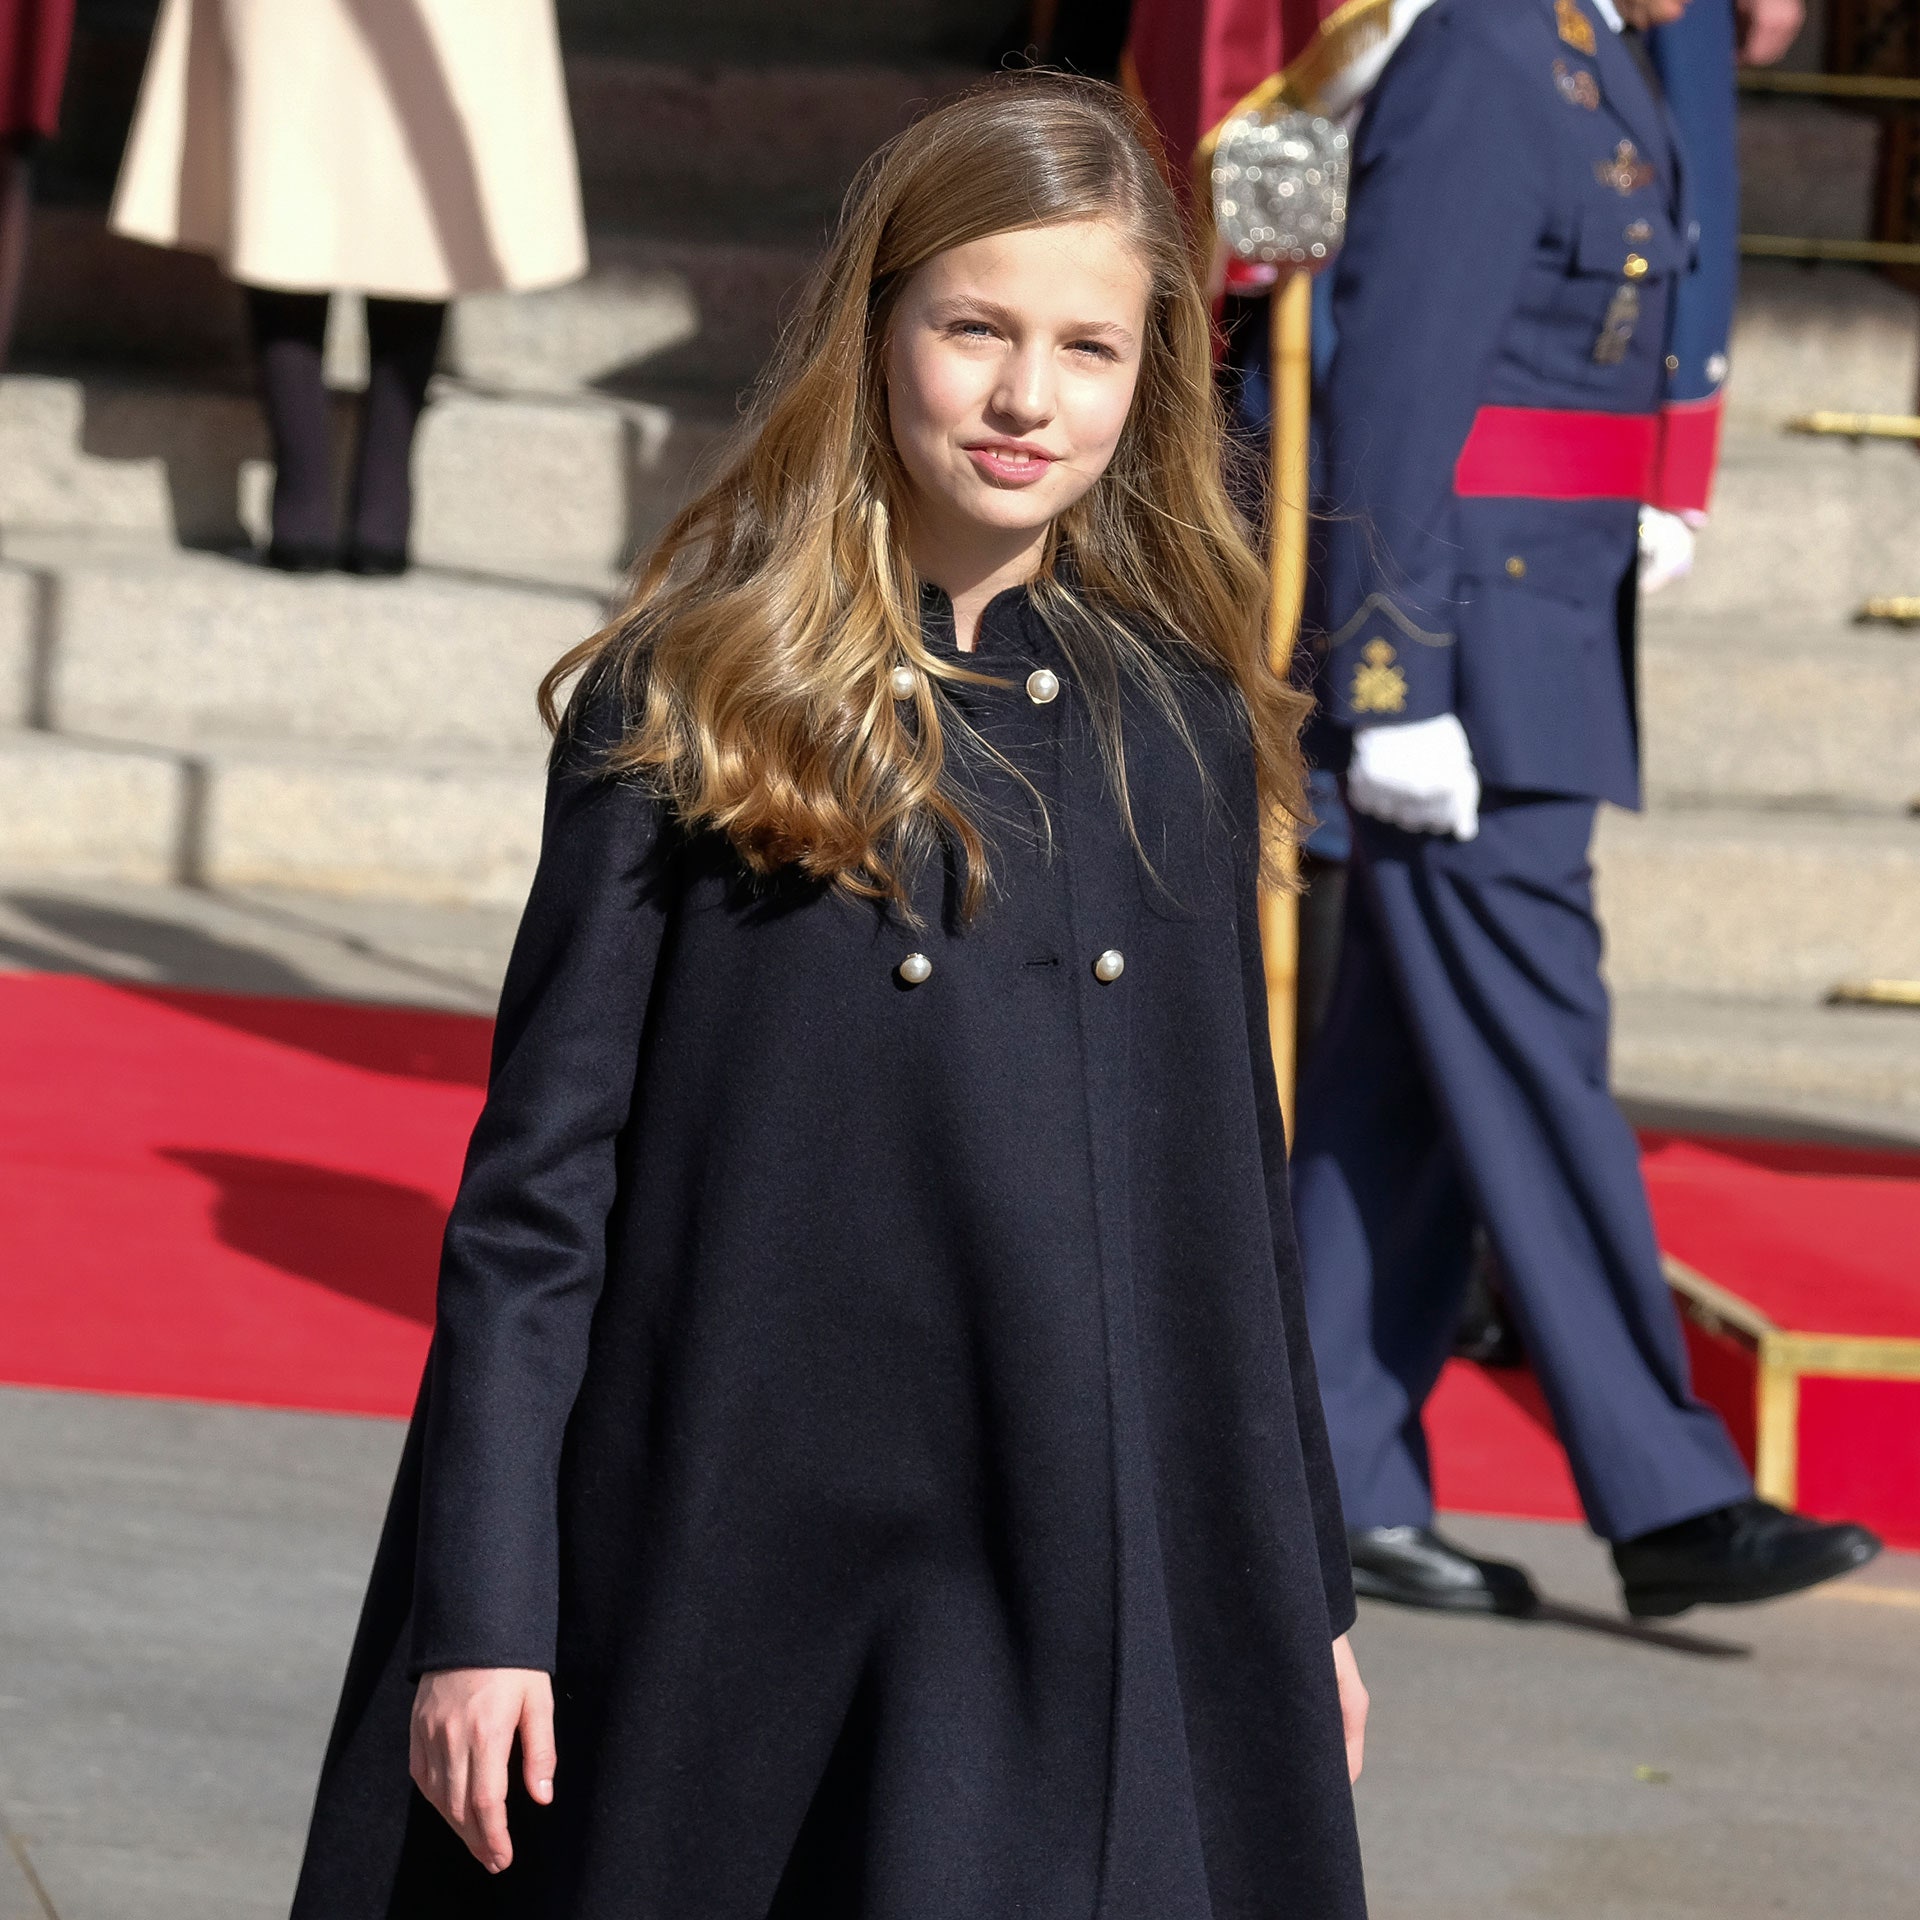 Princess Leonor of Spain, carries out her first solo royal engagement in Madrid